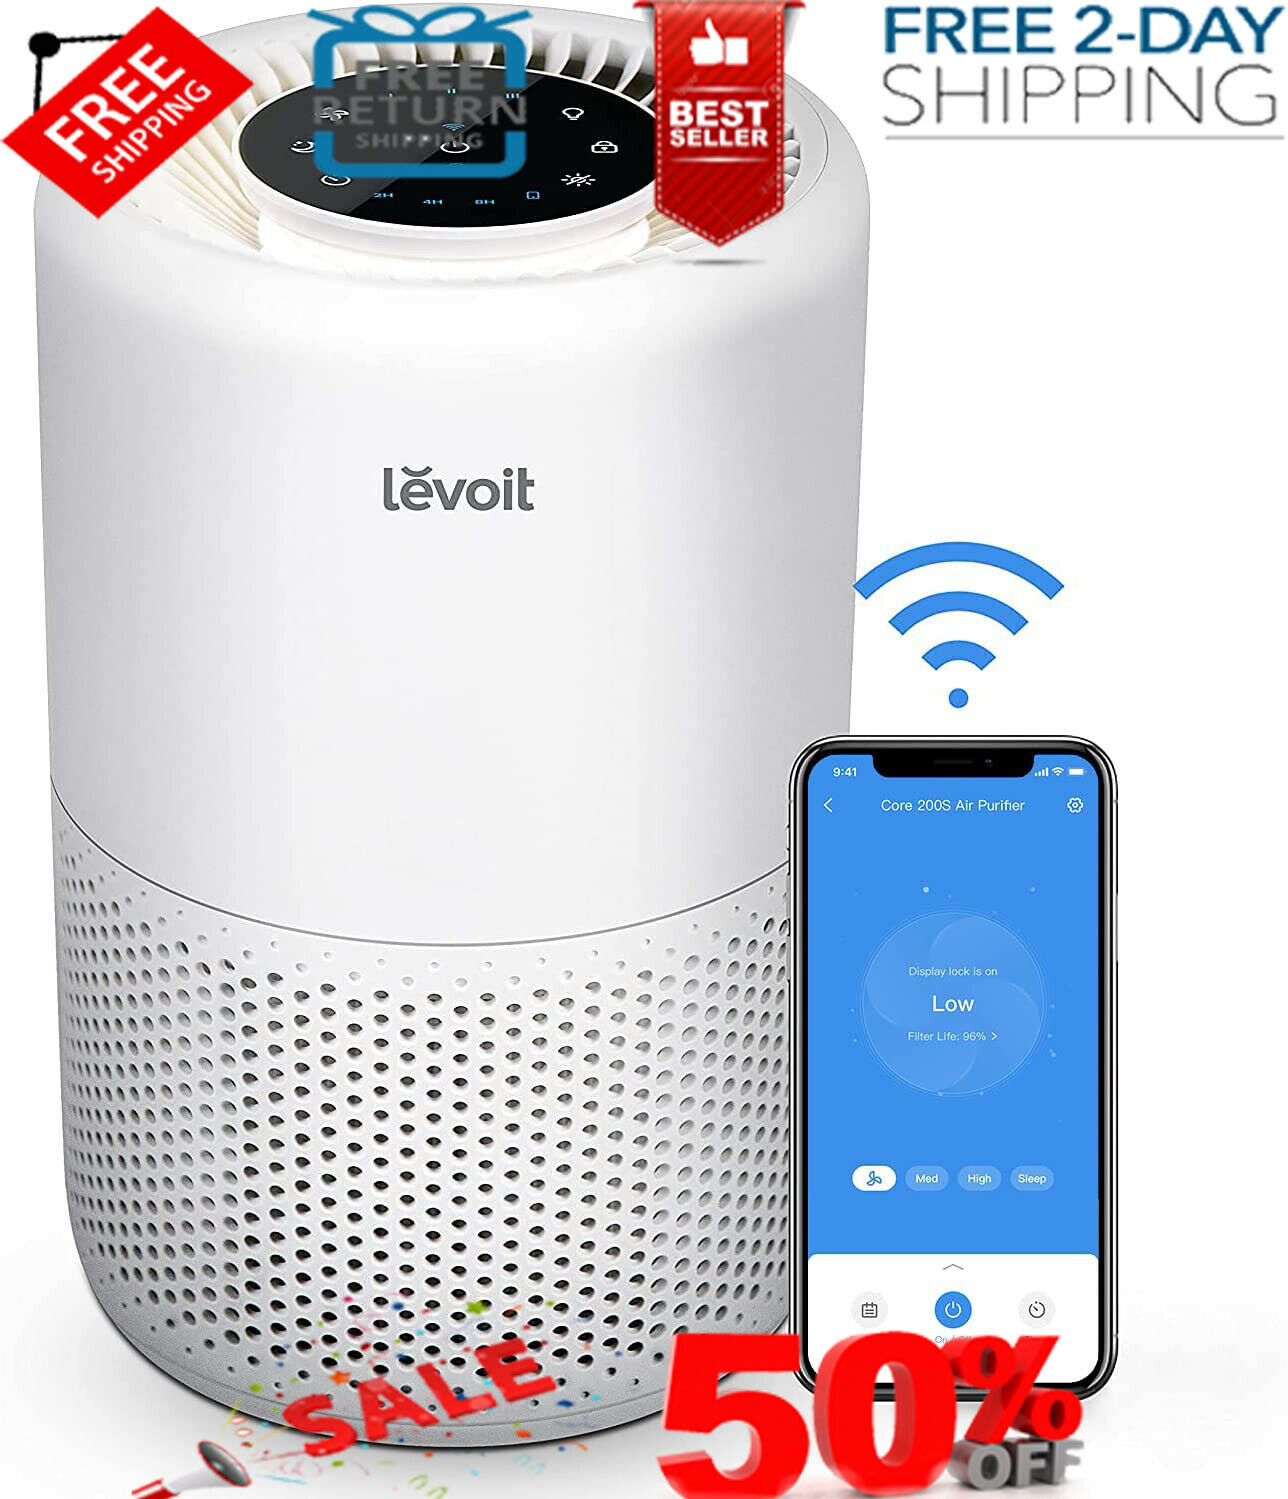 LEVOIT Smart WiFi Air Purifier for Home, Alexa Enabled H13 True HEPA Filter for